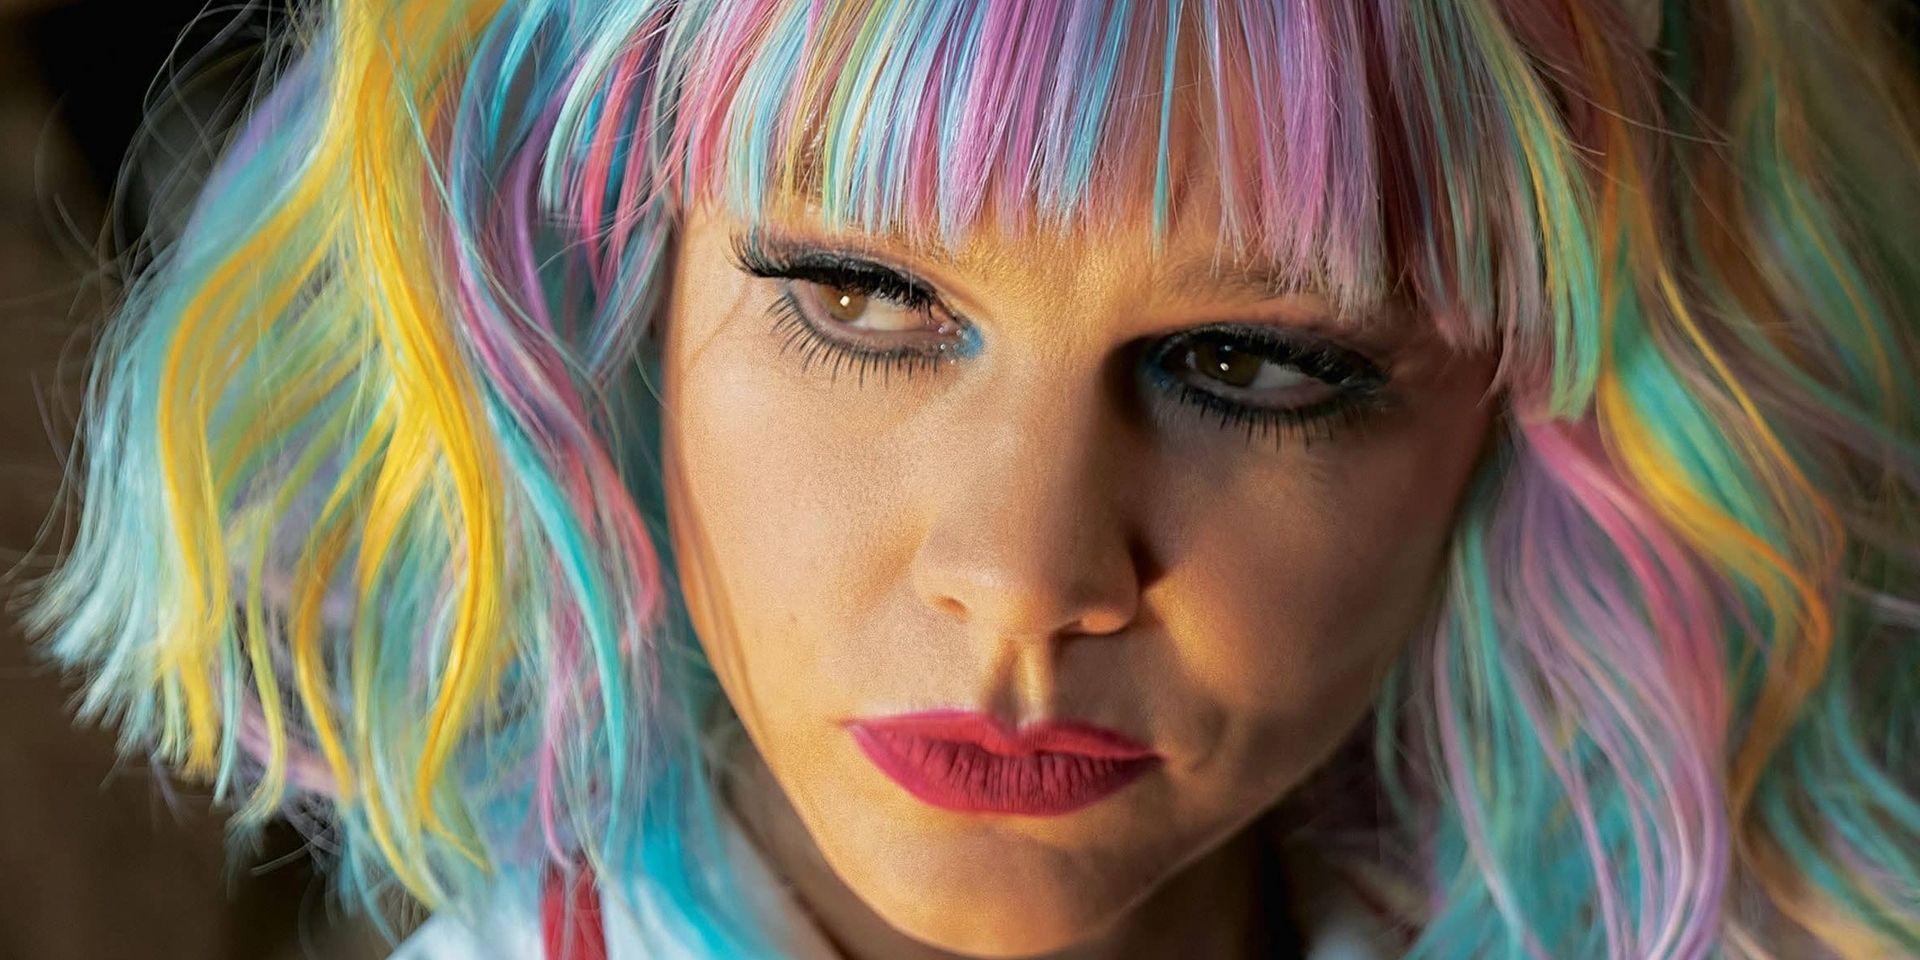 Carey Mulligan wears a multi-colored wig in Promising Young Woman